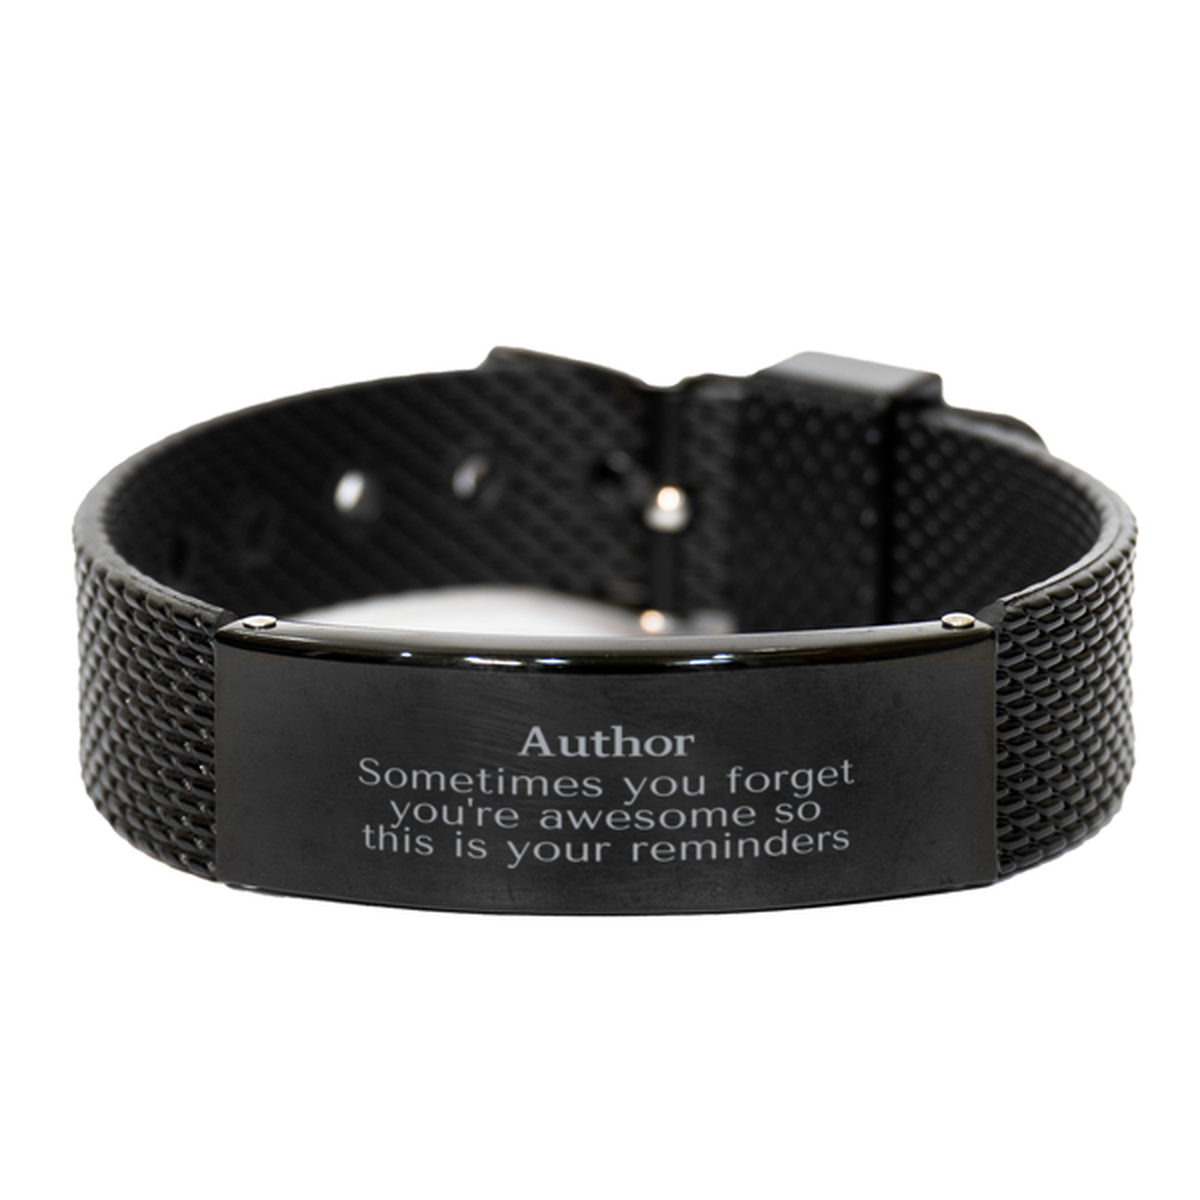 Sentimental Author Black Shark Mesh Bracelet, Author Sometimes you forget you're awesome so this is your reminders, Graduation Christmas Birthday Gifts for Author, Men, Women, Coworkers